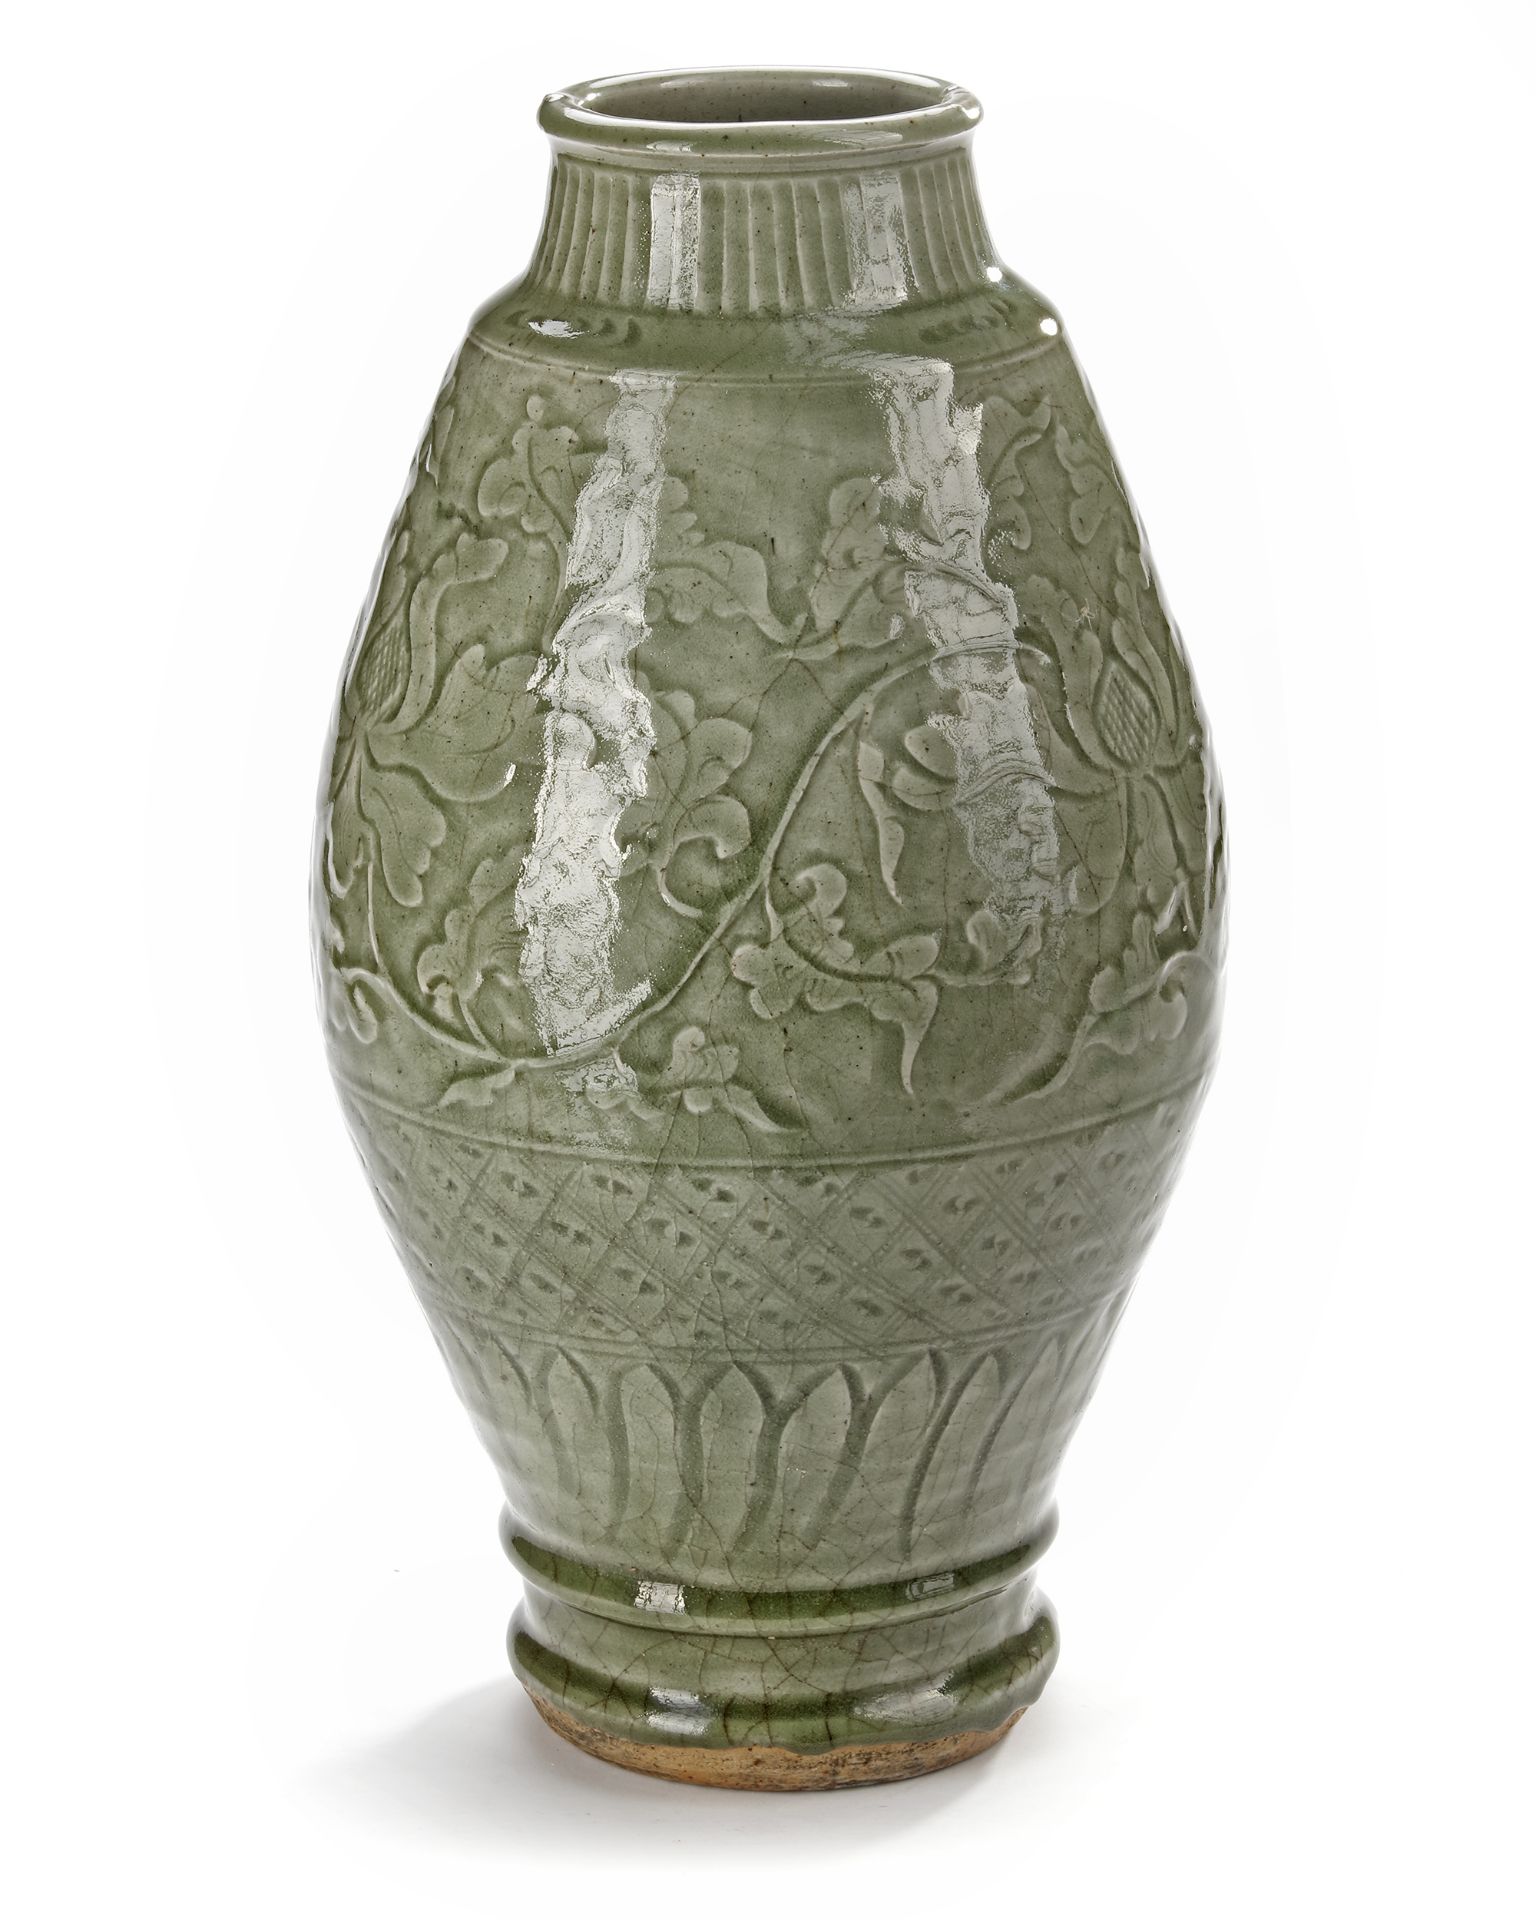 A LARGE CHINESE LONGQUAN CELADON VASE, MING DYNASTY (1368-1644) - Image 3 of 5